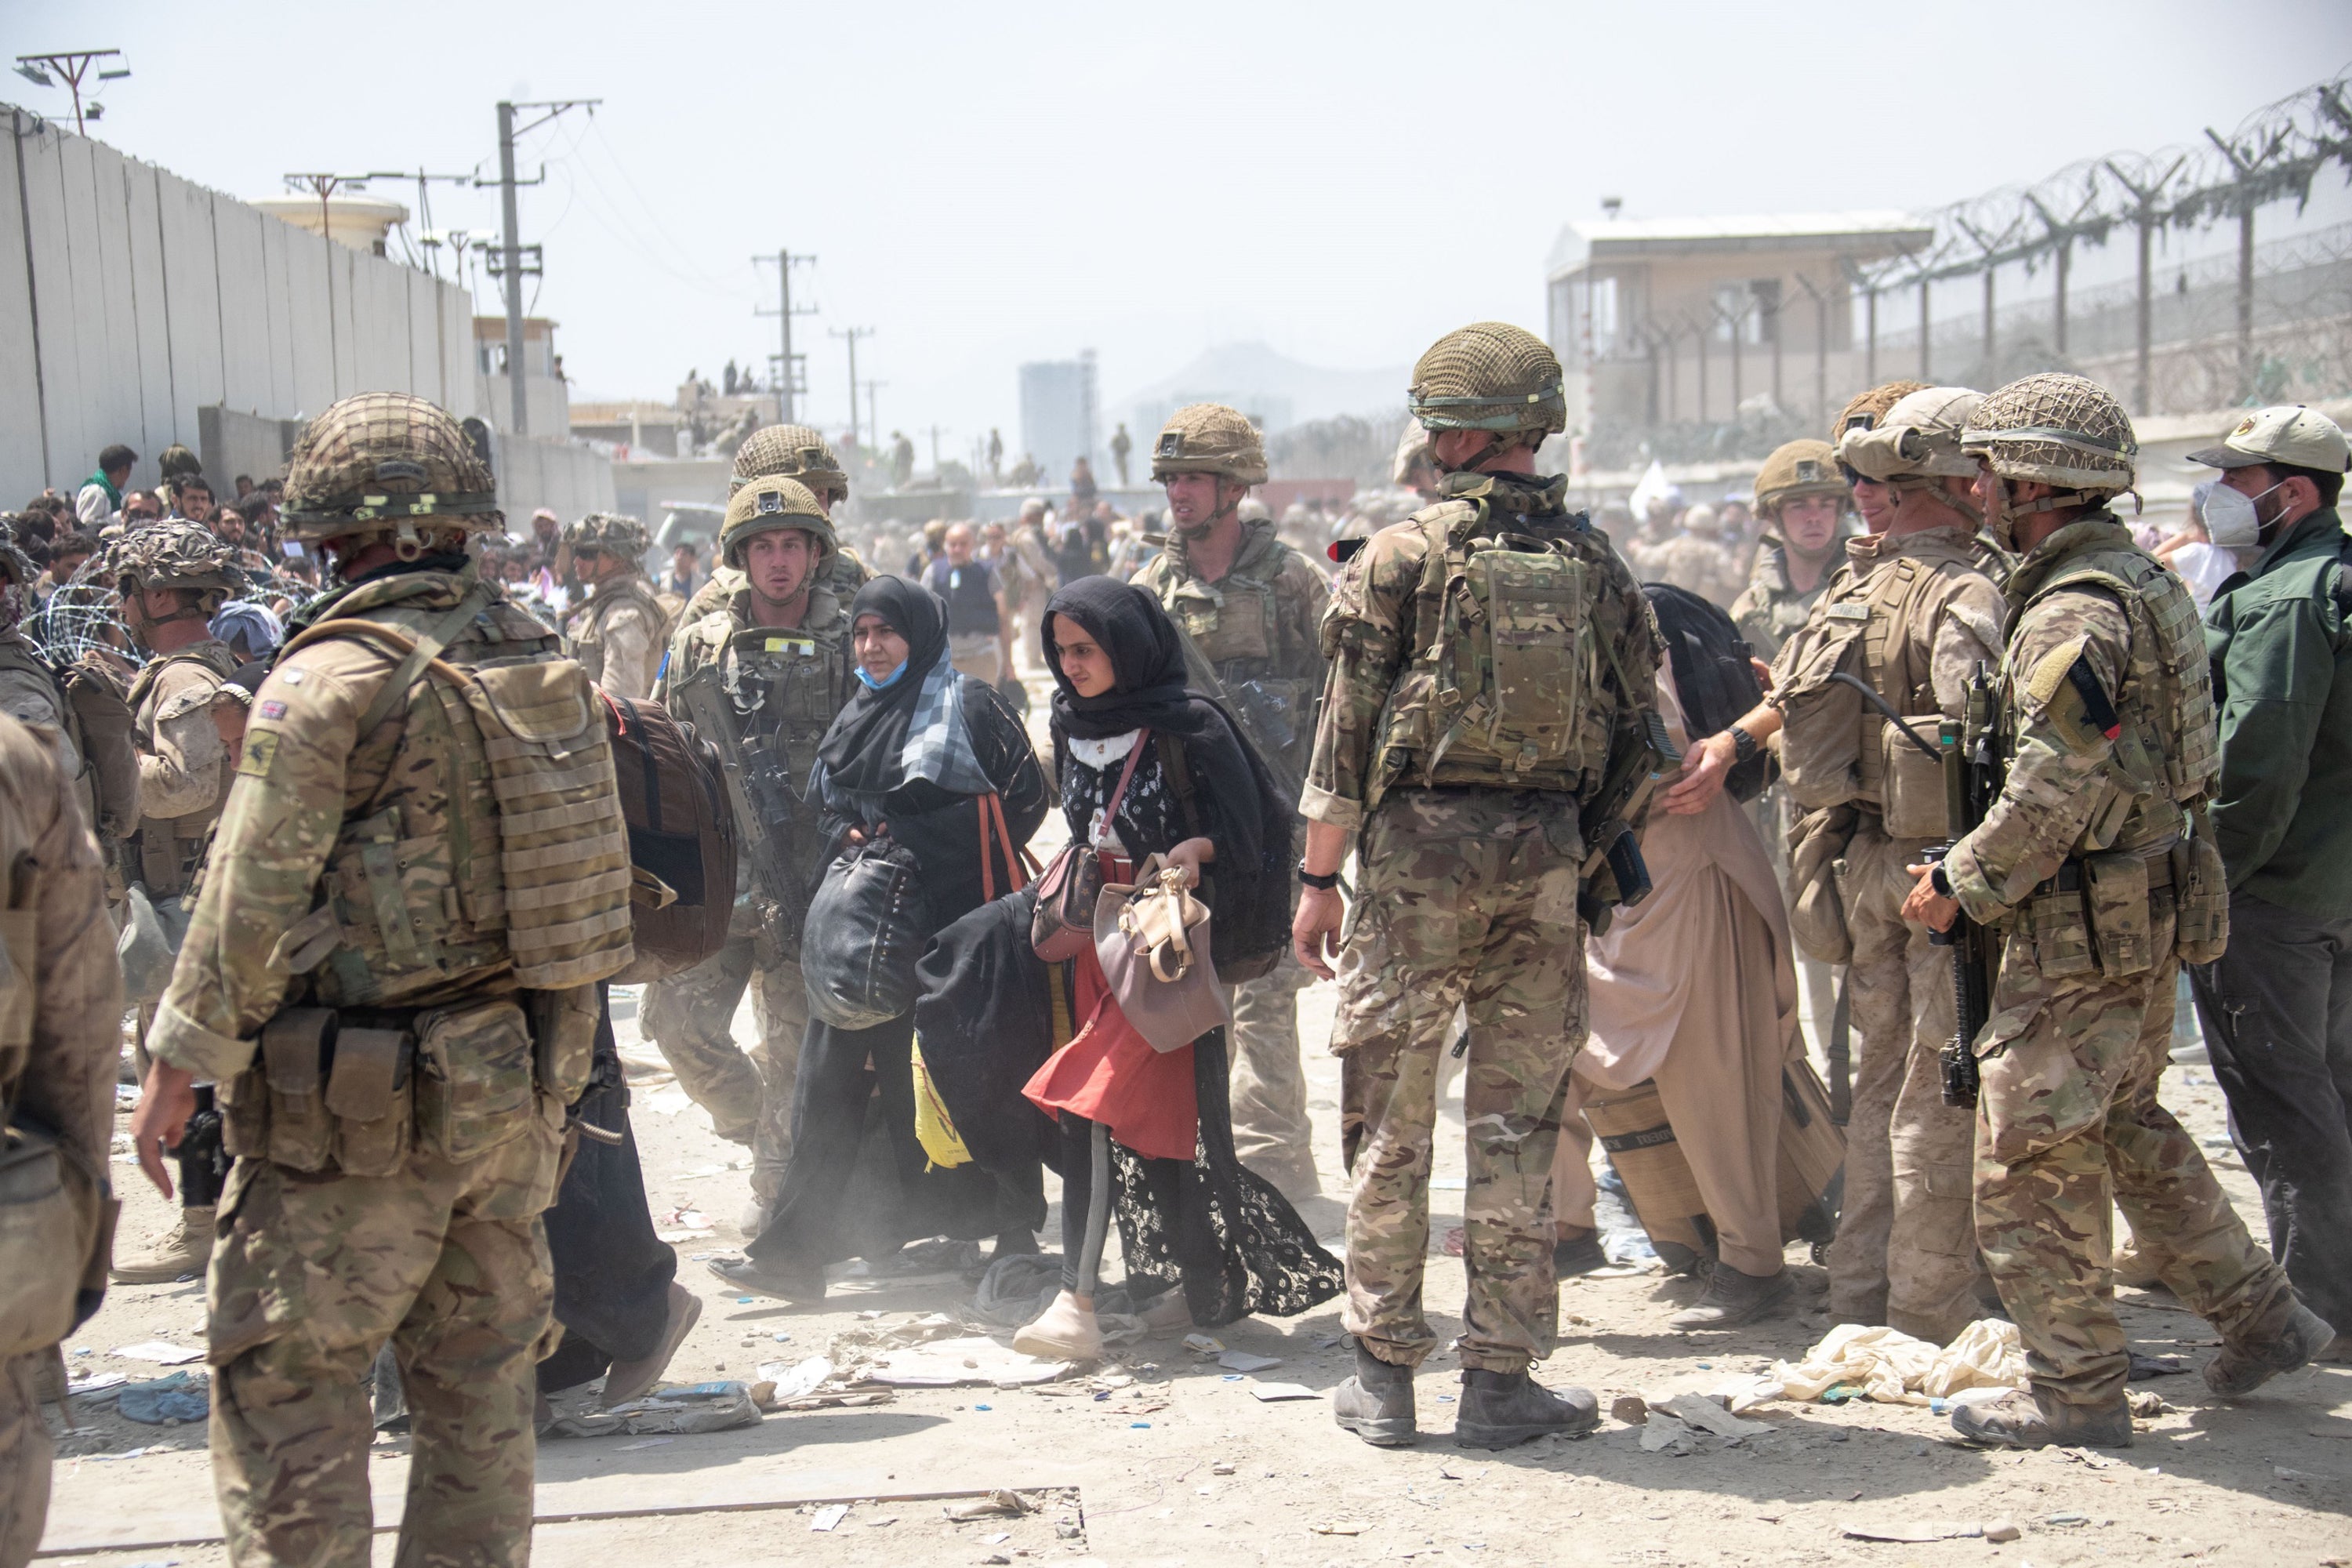 Over 15,000 people were evacuated from Afghanistan by the UK’s Armed Forces (LPhot Ben Shread/MoD/PA)